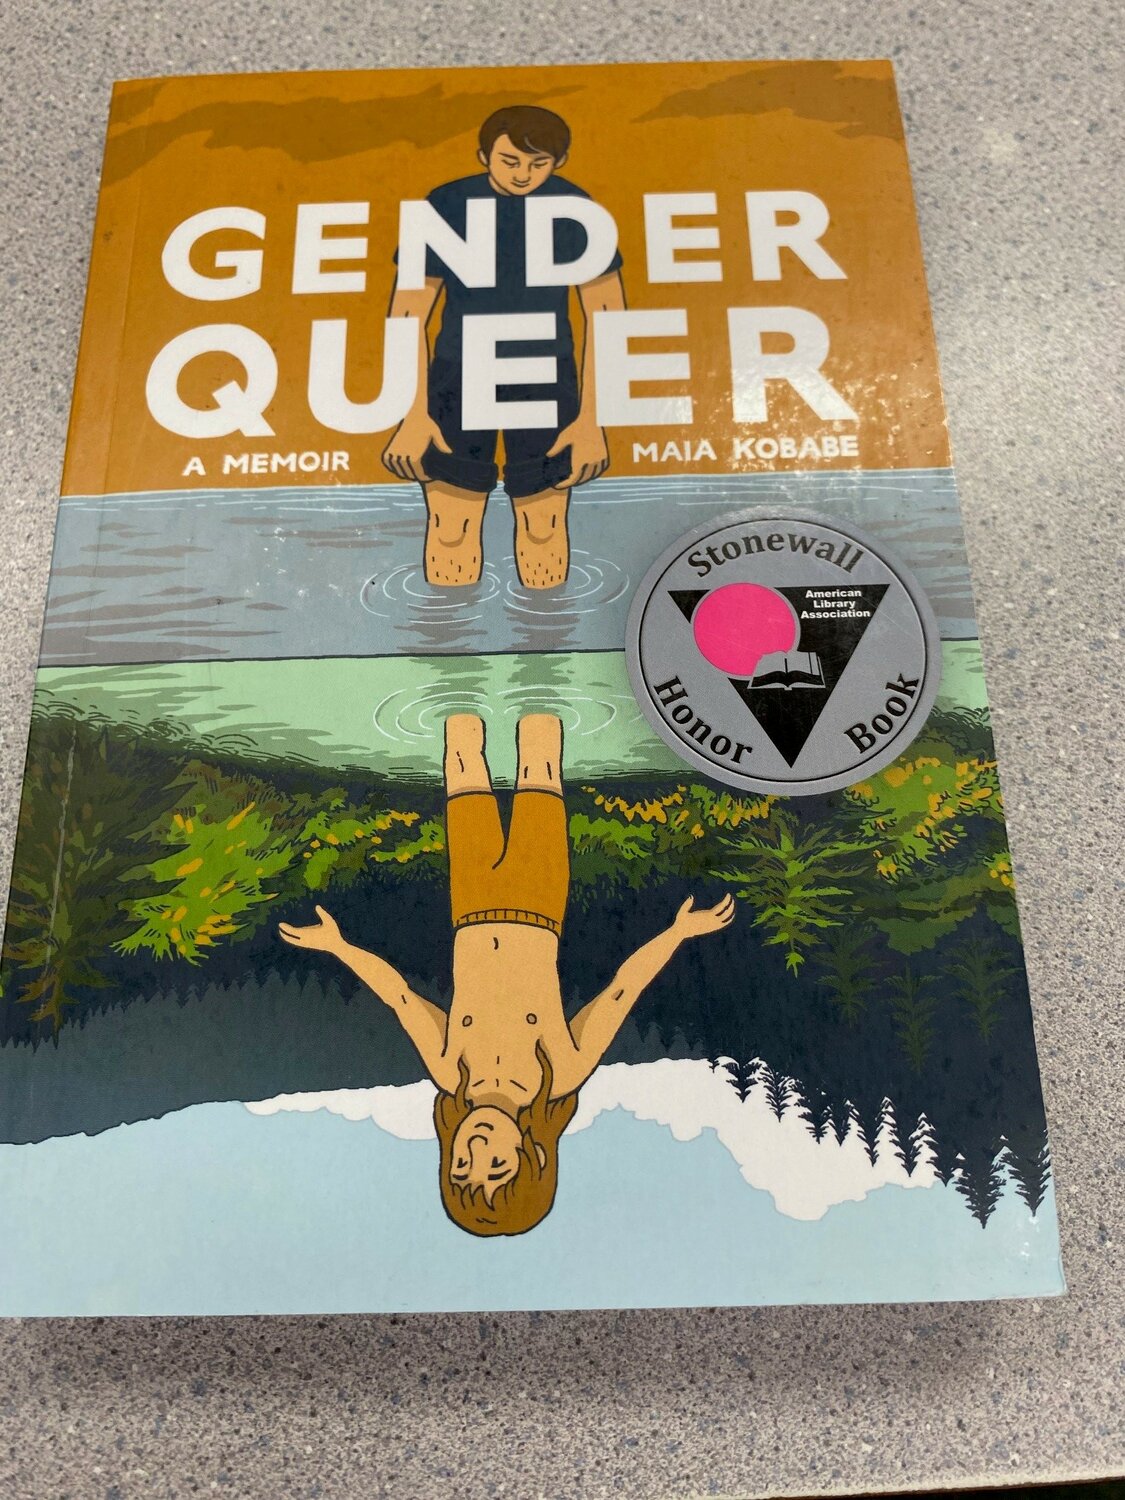 The Central Bucks School District recently removed “Gender Queer” by Maia Kobabe from its libraries.